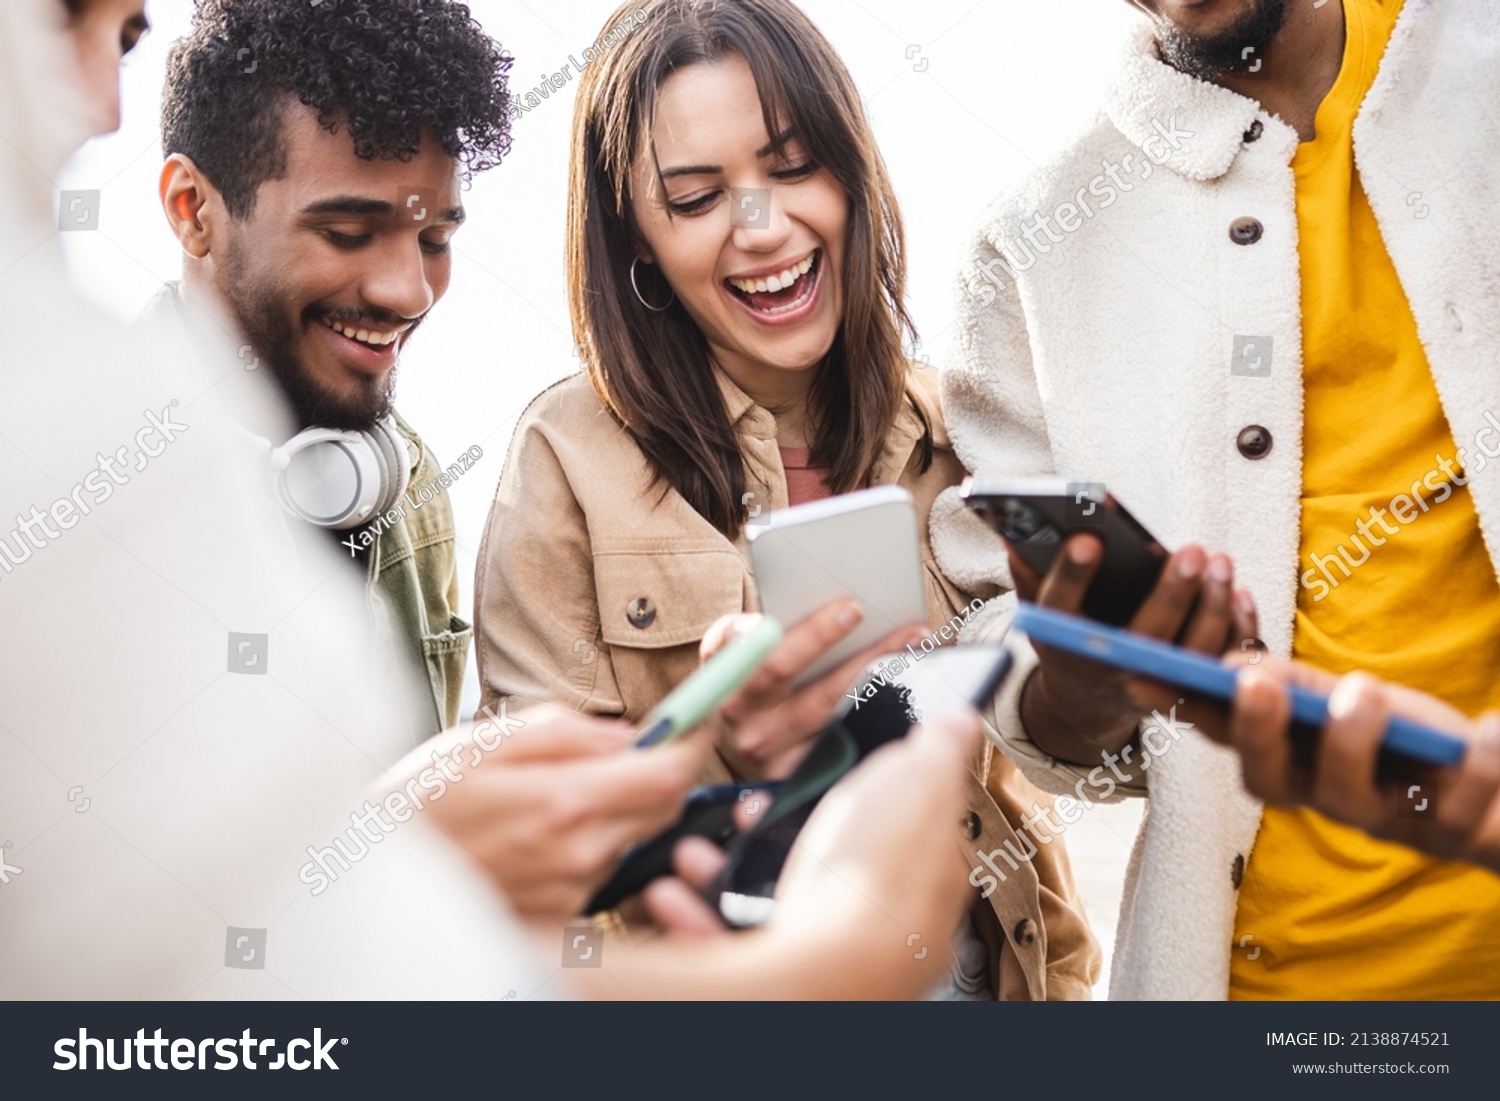 Young group of people using mobile phone outdoors - Addicted diverse friends holding smartphones sharing social media content on digital network app - Youth and technology concept - Focus woman face #2138874521